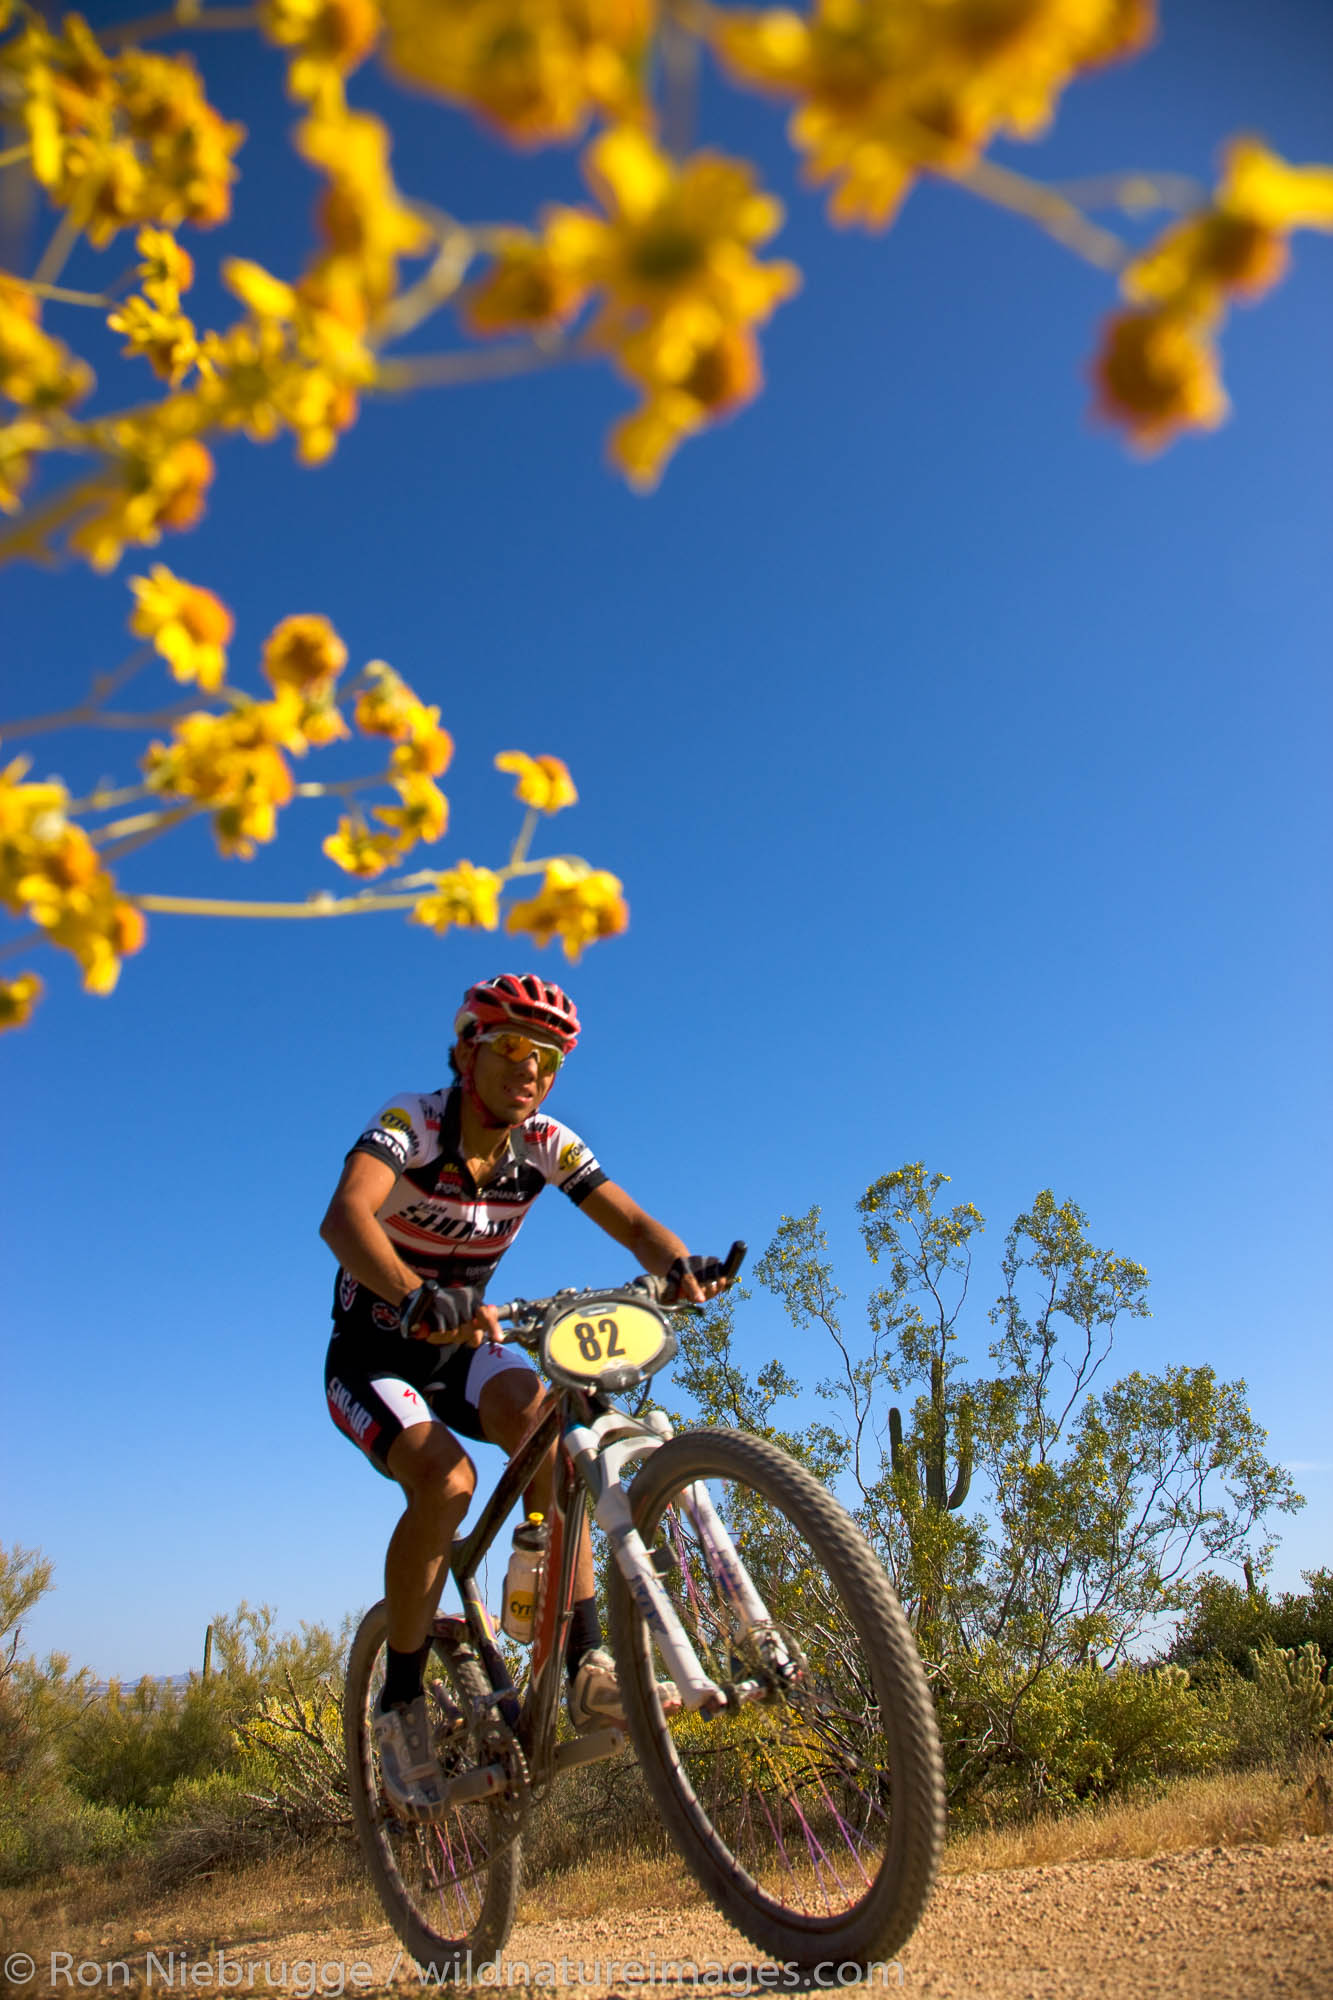 The 2008 Pro Mens Kenda Cross Country race as part of the National Mountain Bike Series Races at McDowell Mountain Regional Park...